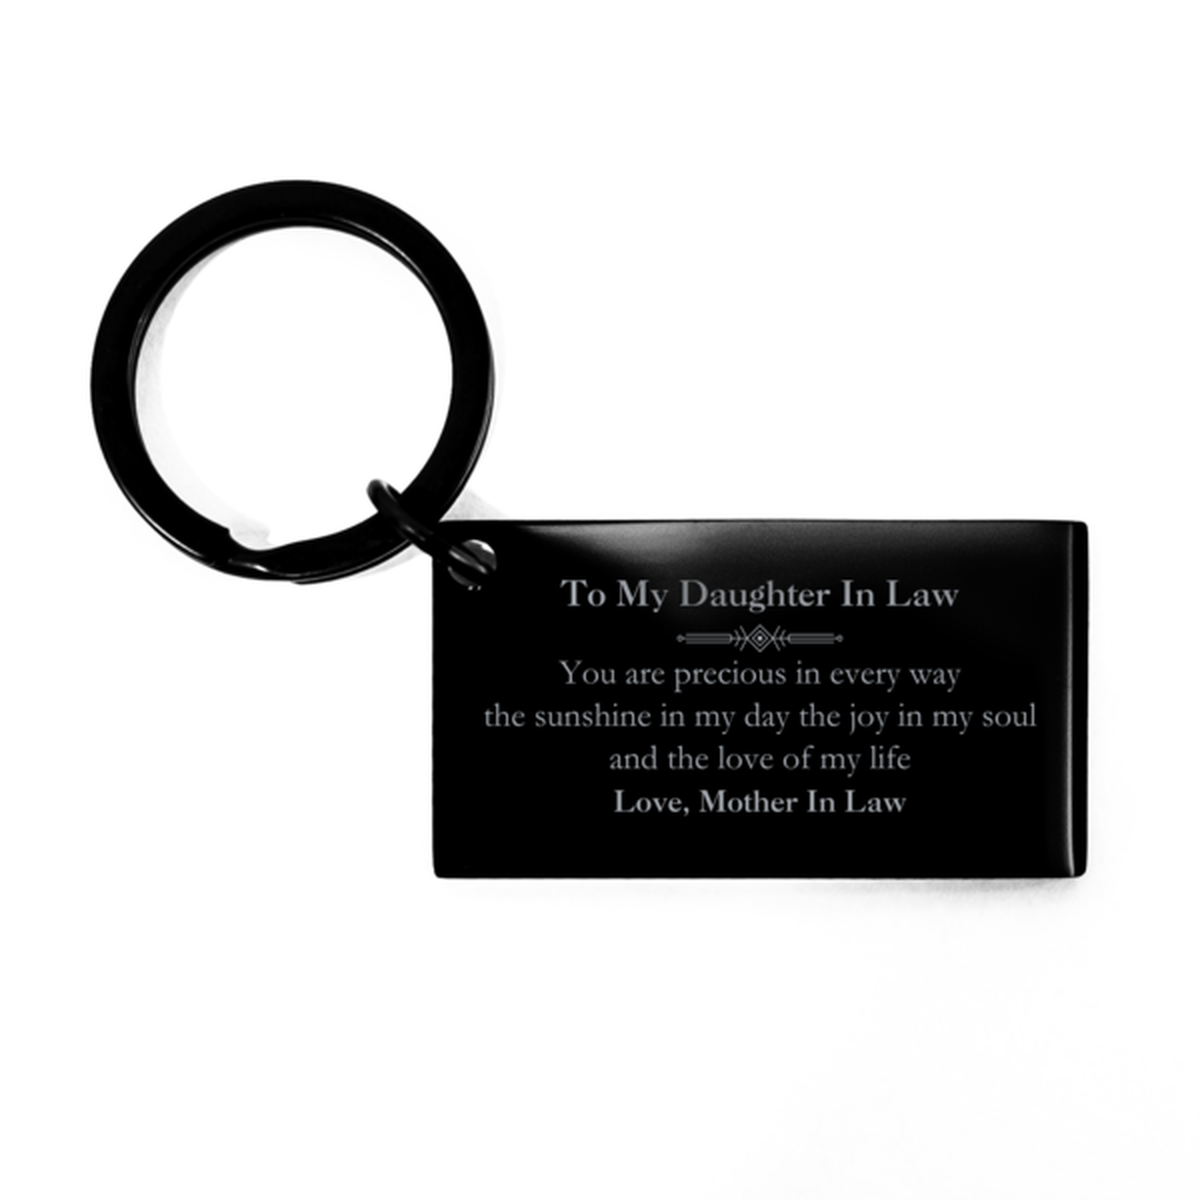 Graduation Gifts for Daughter In Law Keychain Present from Mother In Law, Christmas Daughter In Law Birthday Gifts Daughter In Law You are precious in every way the sunshine in my day. Love, Mother In Law